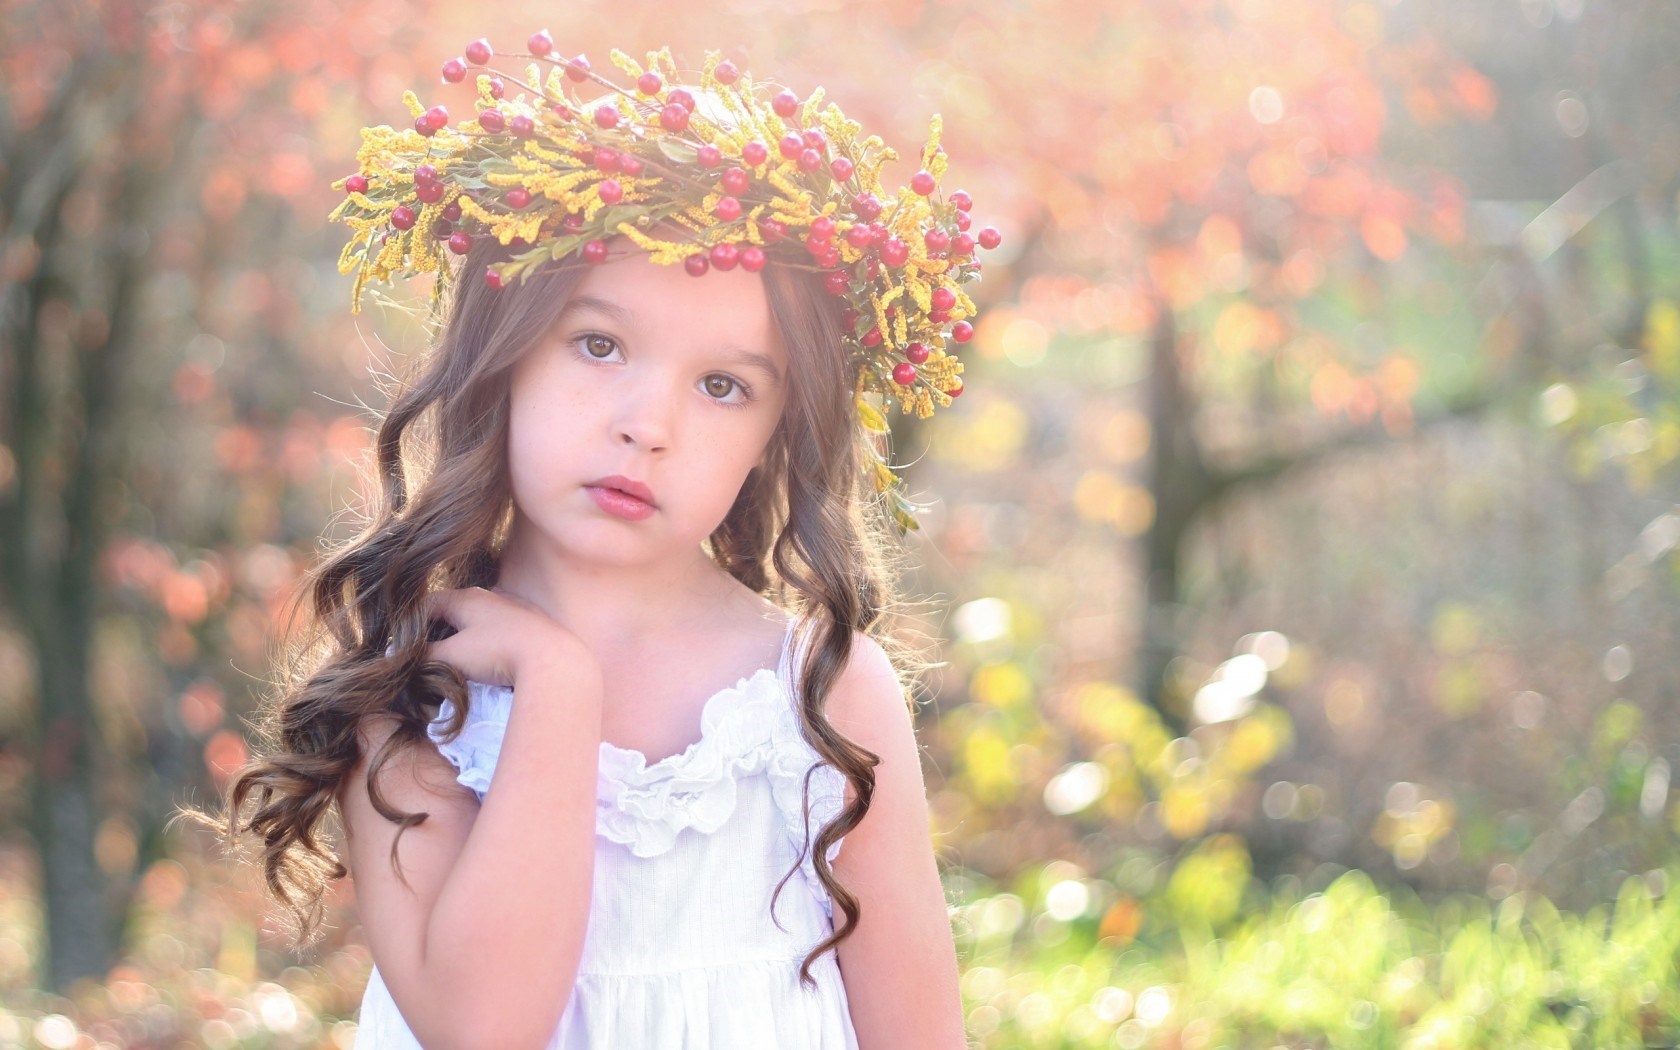 sweet girl wallpaper,people in nature,hair,headpiece,photograph,child